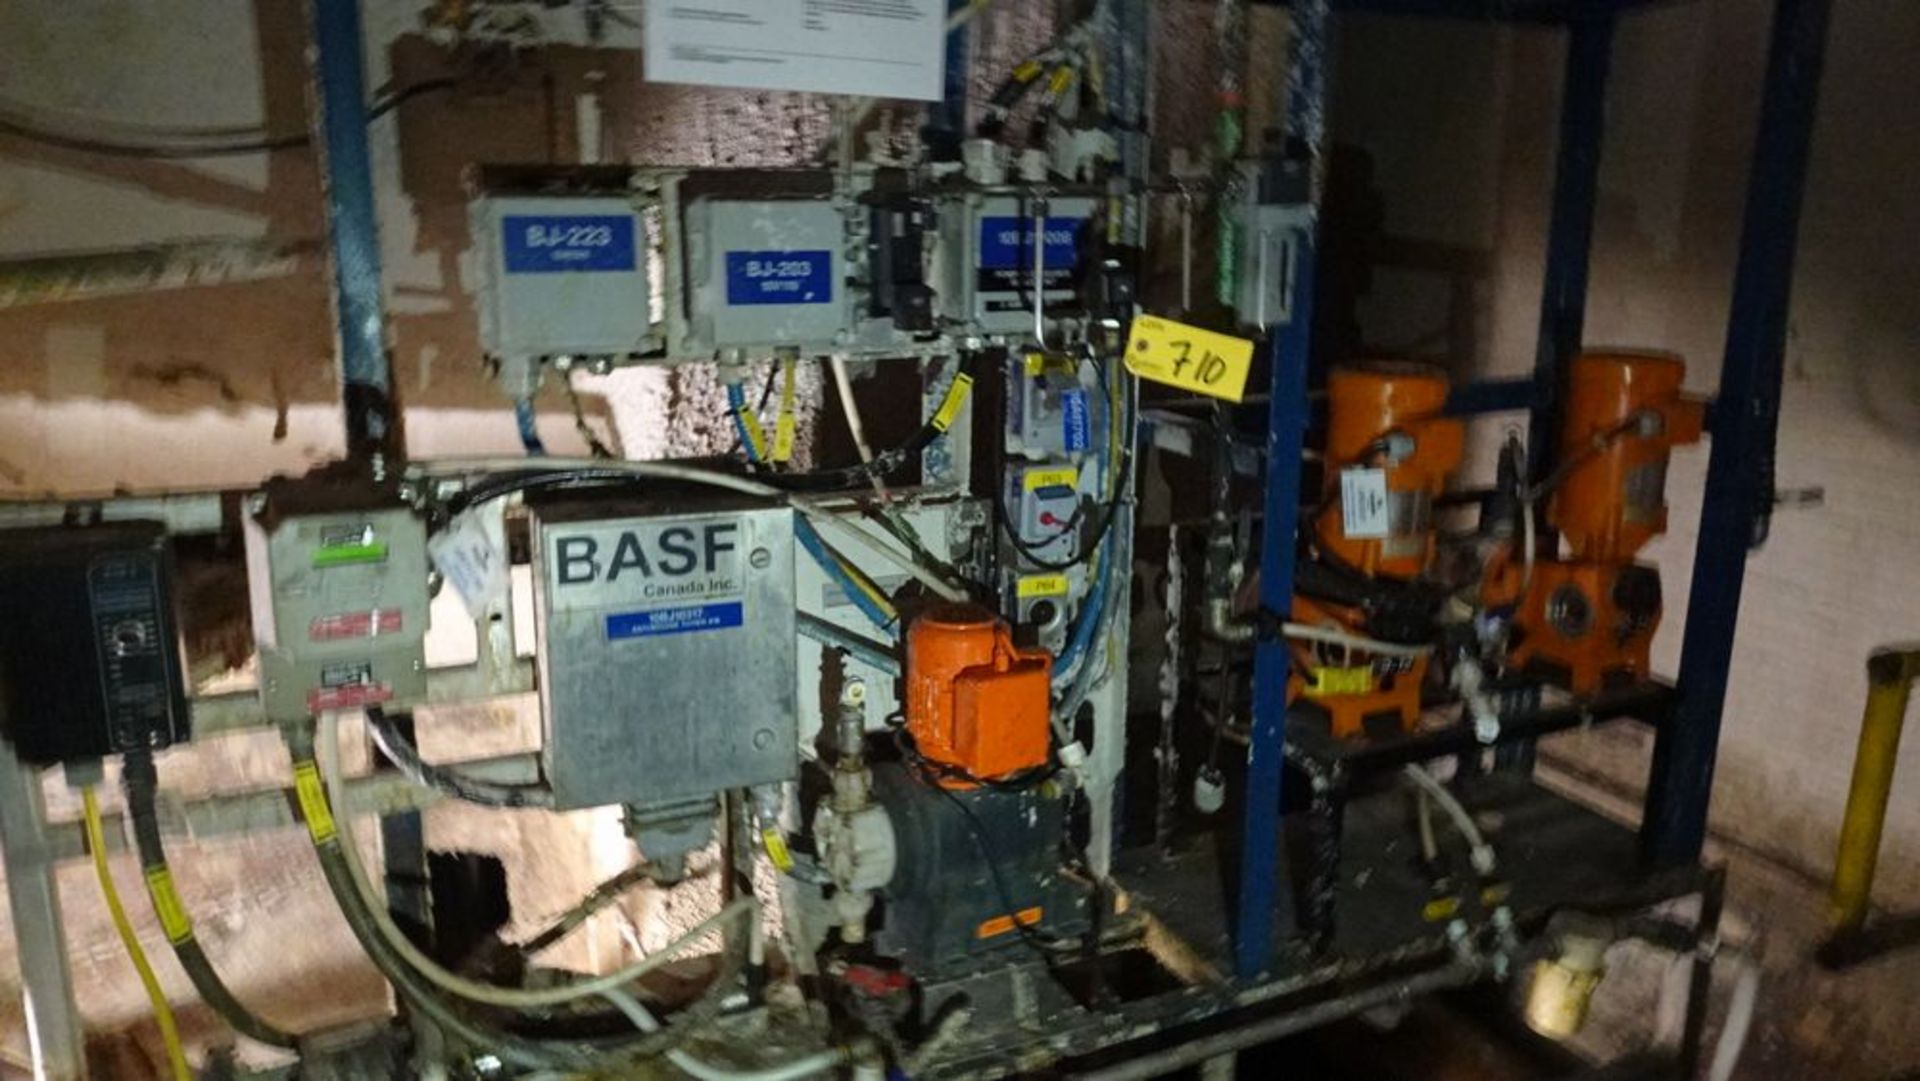 ASSORTED PUMPS, CONTROLLERS, SWITCHES, RETURN TO OWNER "BASF" (RIGGING FEE $533)